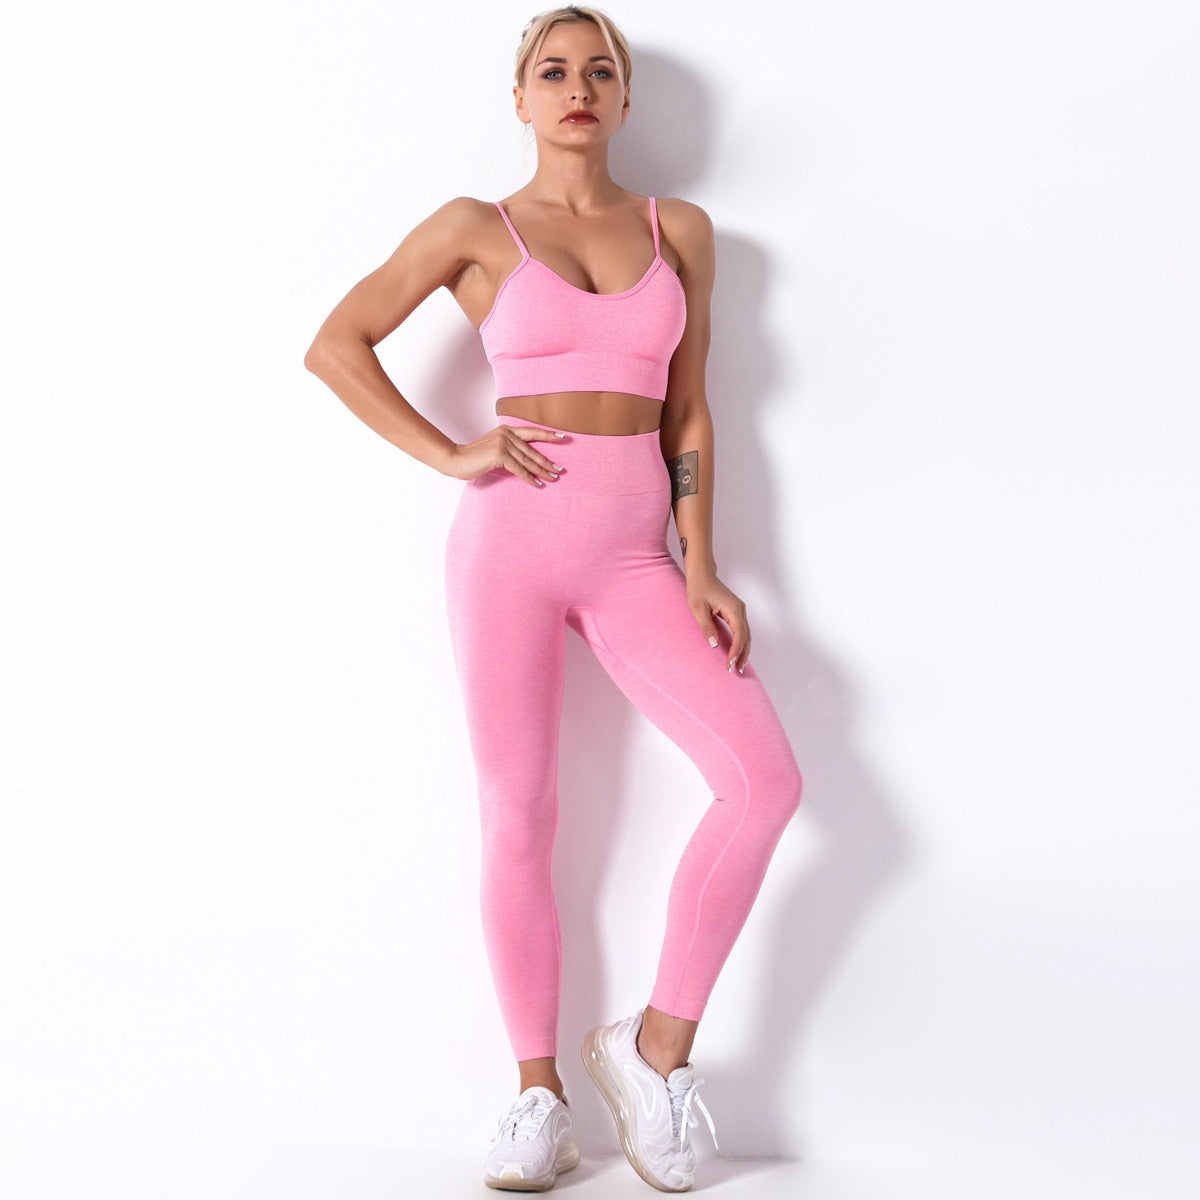 Gym Set Top Women Shorts Summer 2 Piece Outfit Seamless Sports Bra Sportswear Leggings For Fitness Yoga Set Women Clothes